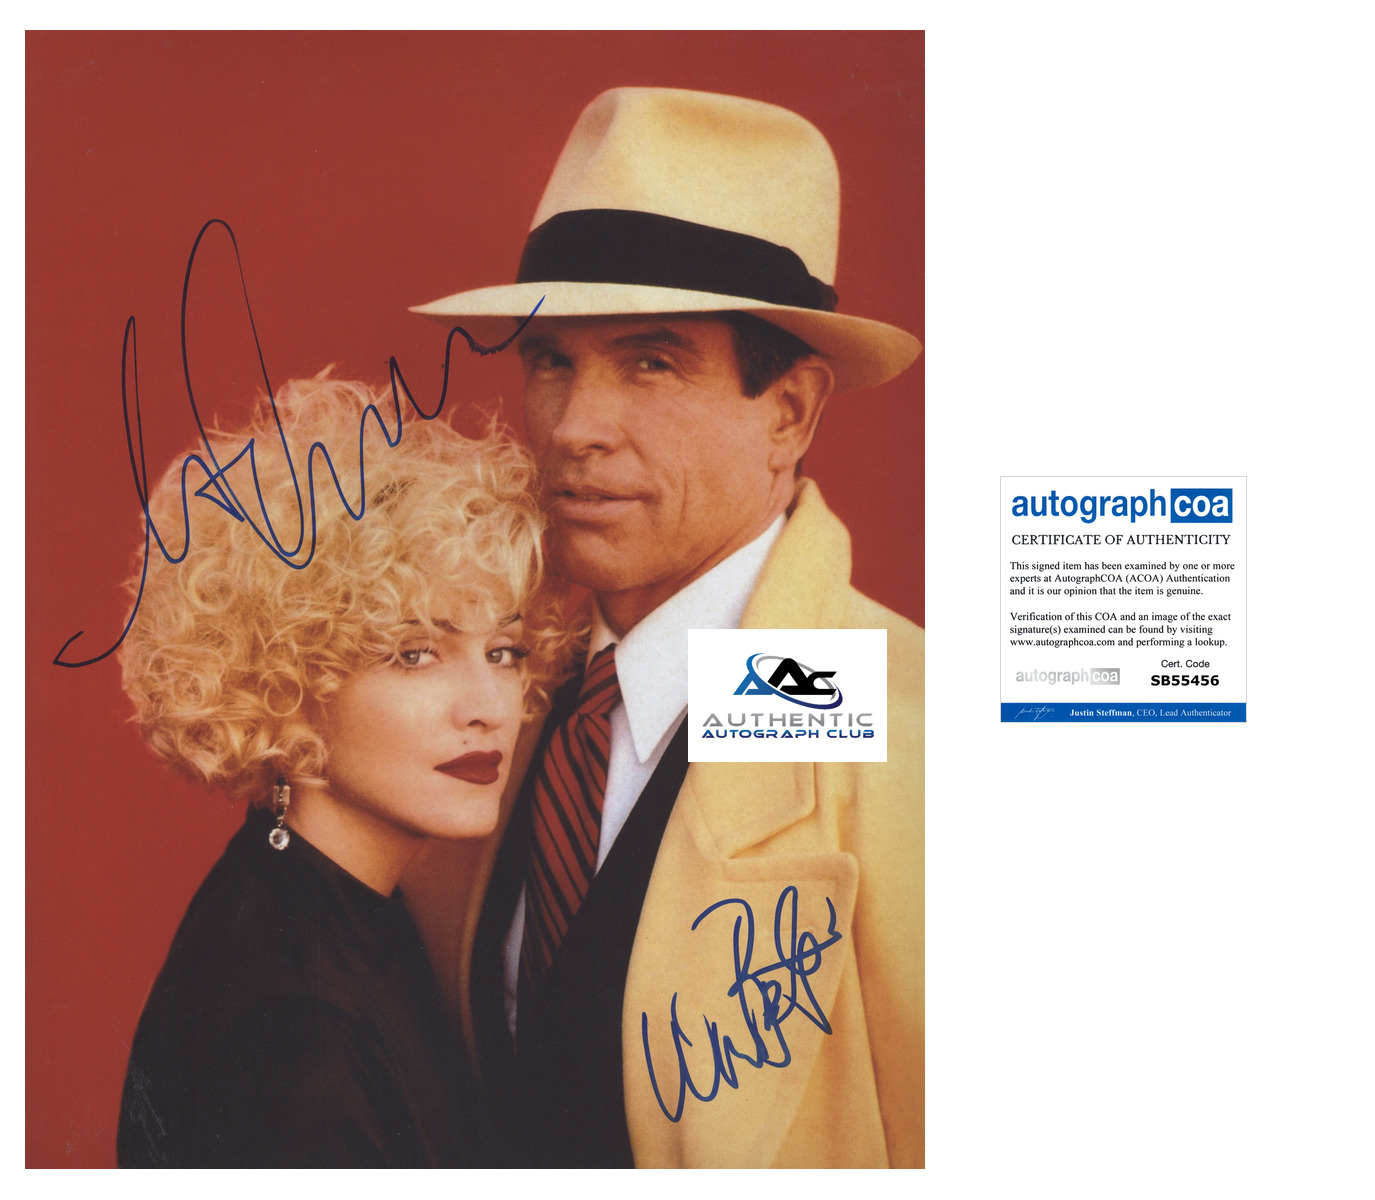 MADONNA AND WARREN BEATTY AUTOGRAPH SIGNED 11x14 PHOTO DICK TRACY ACOA